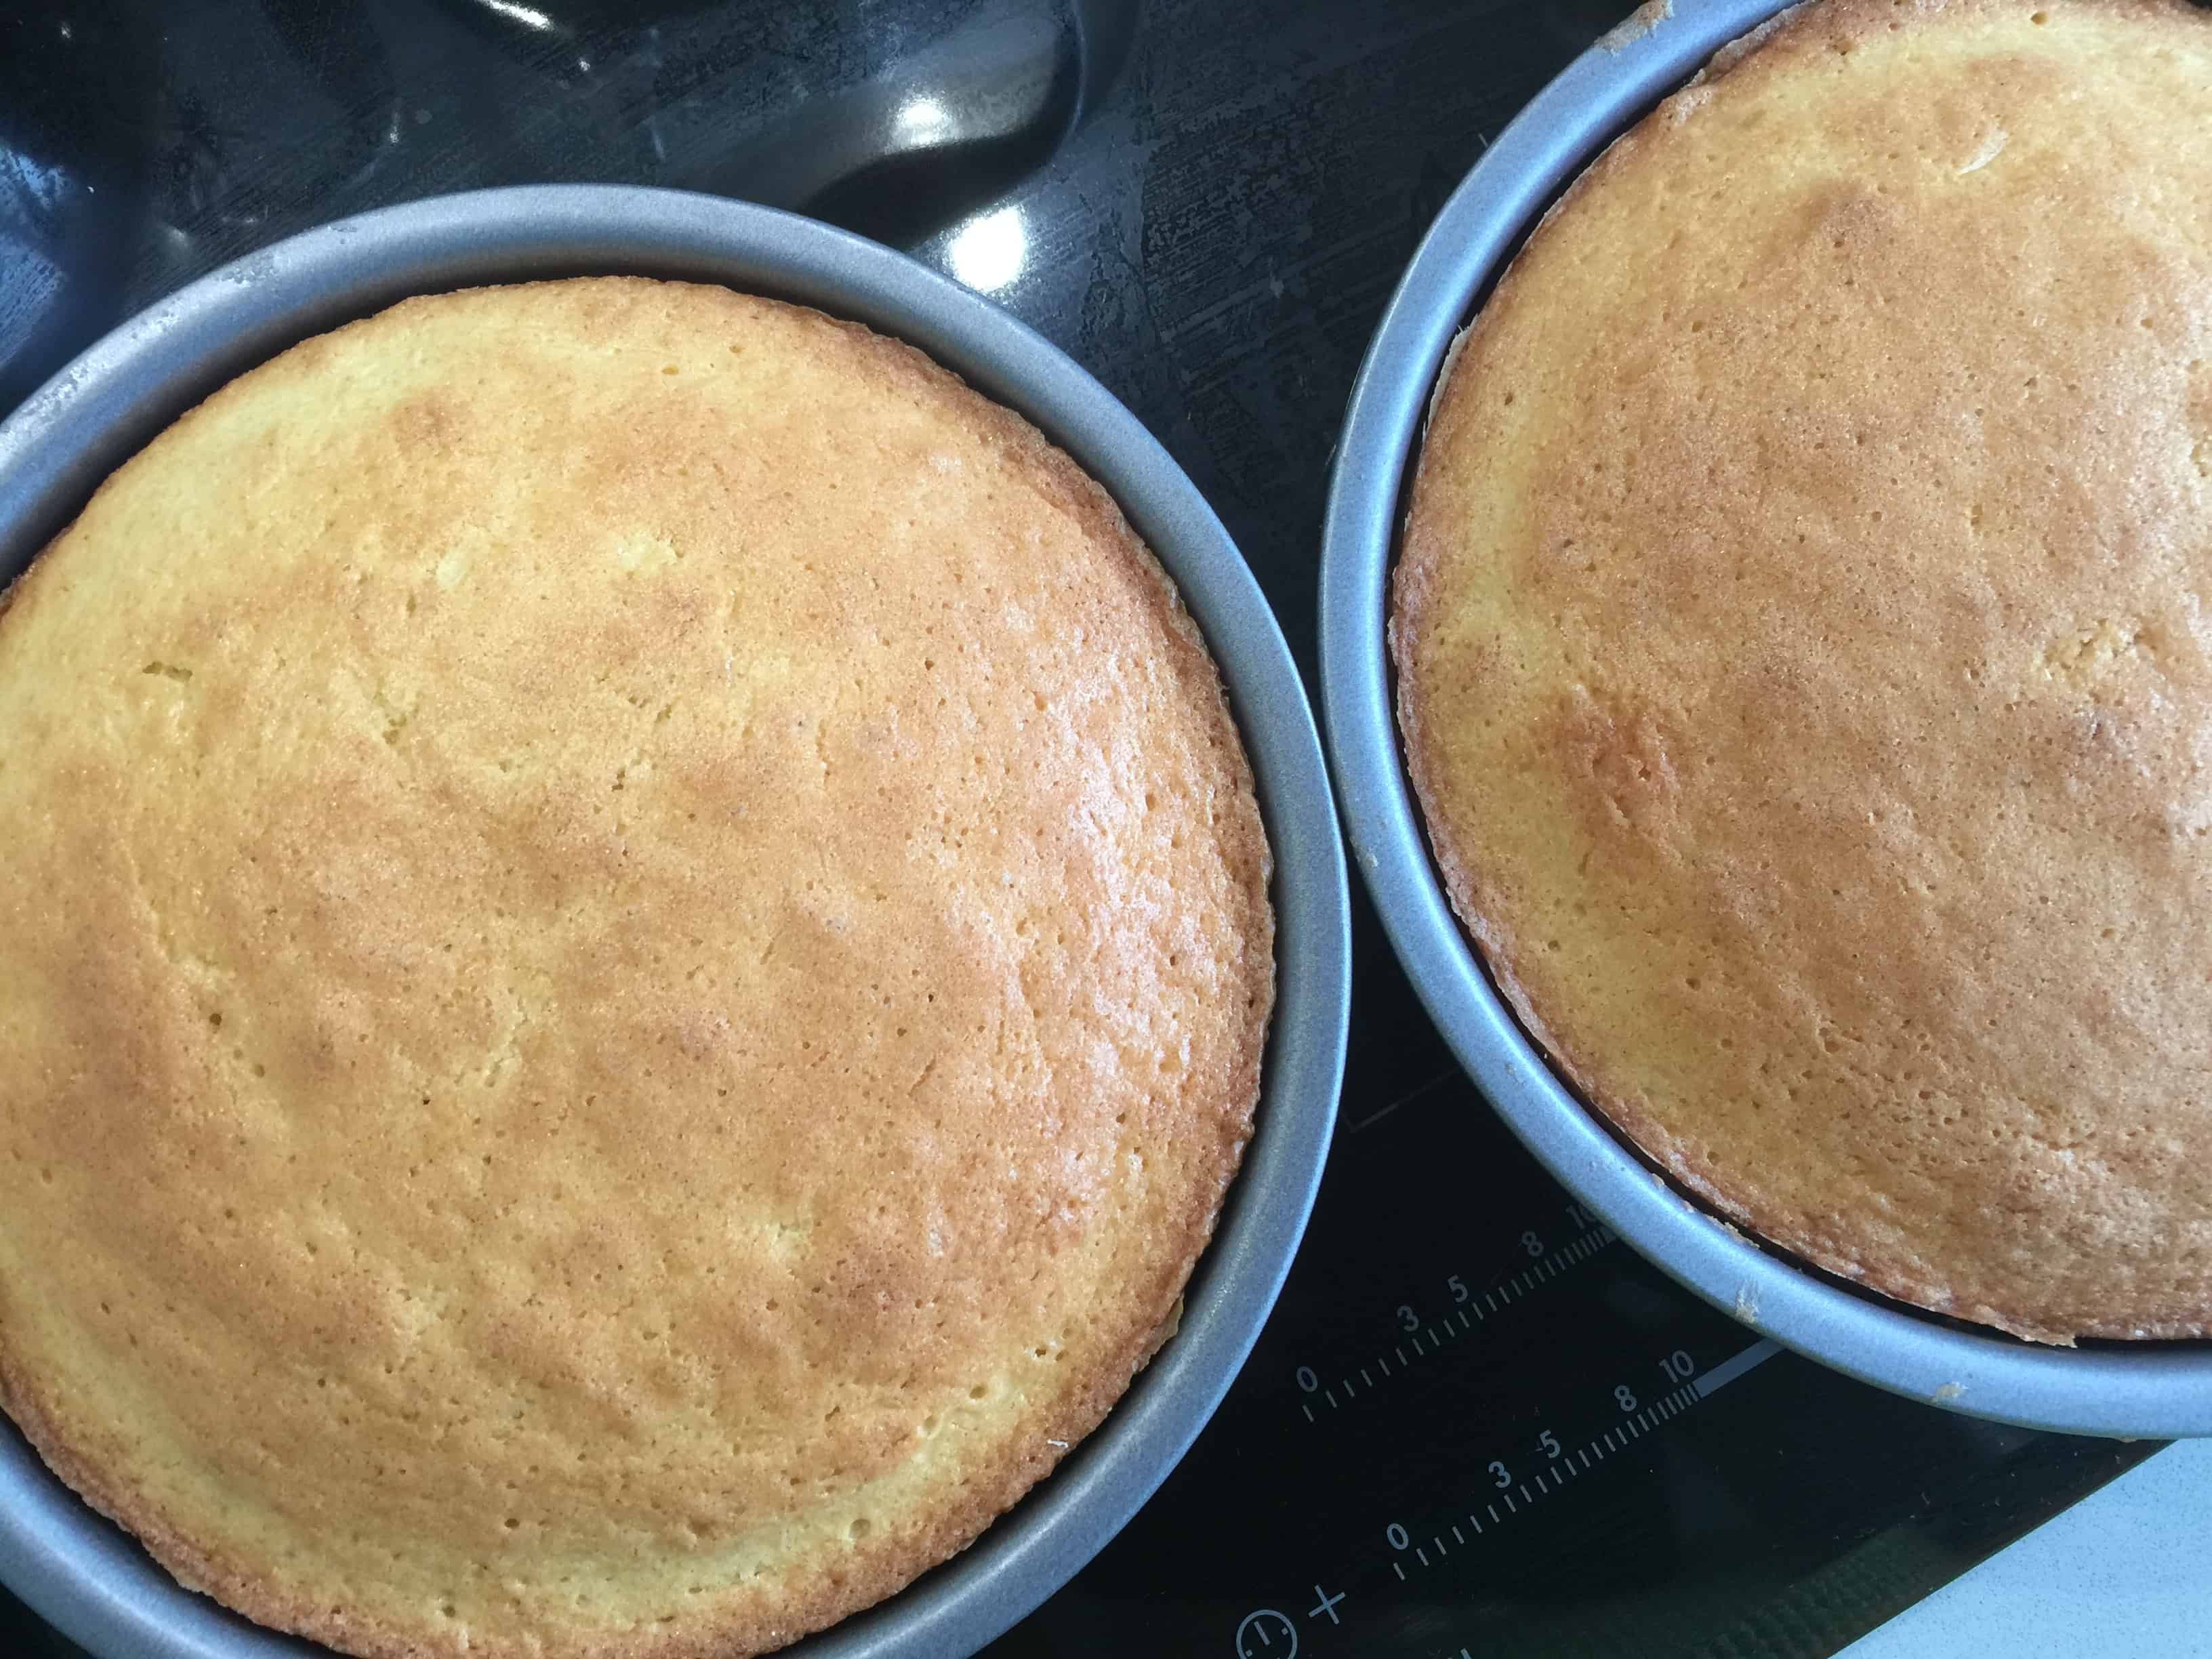 baked cakes in baking tins